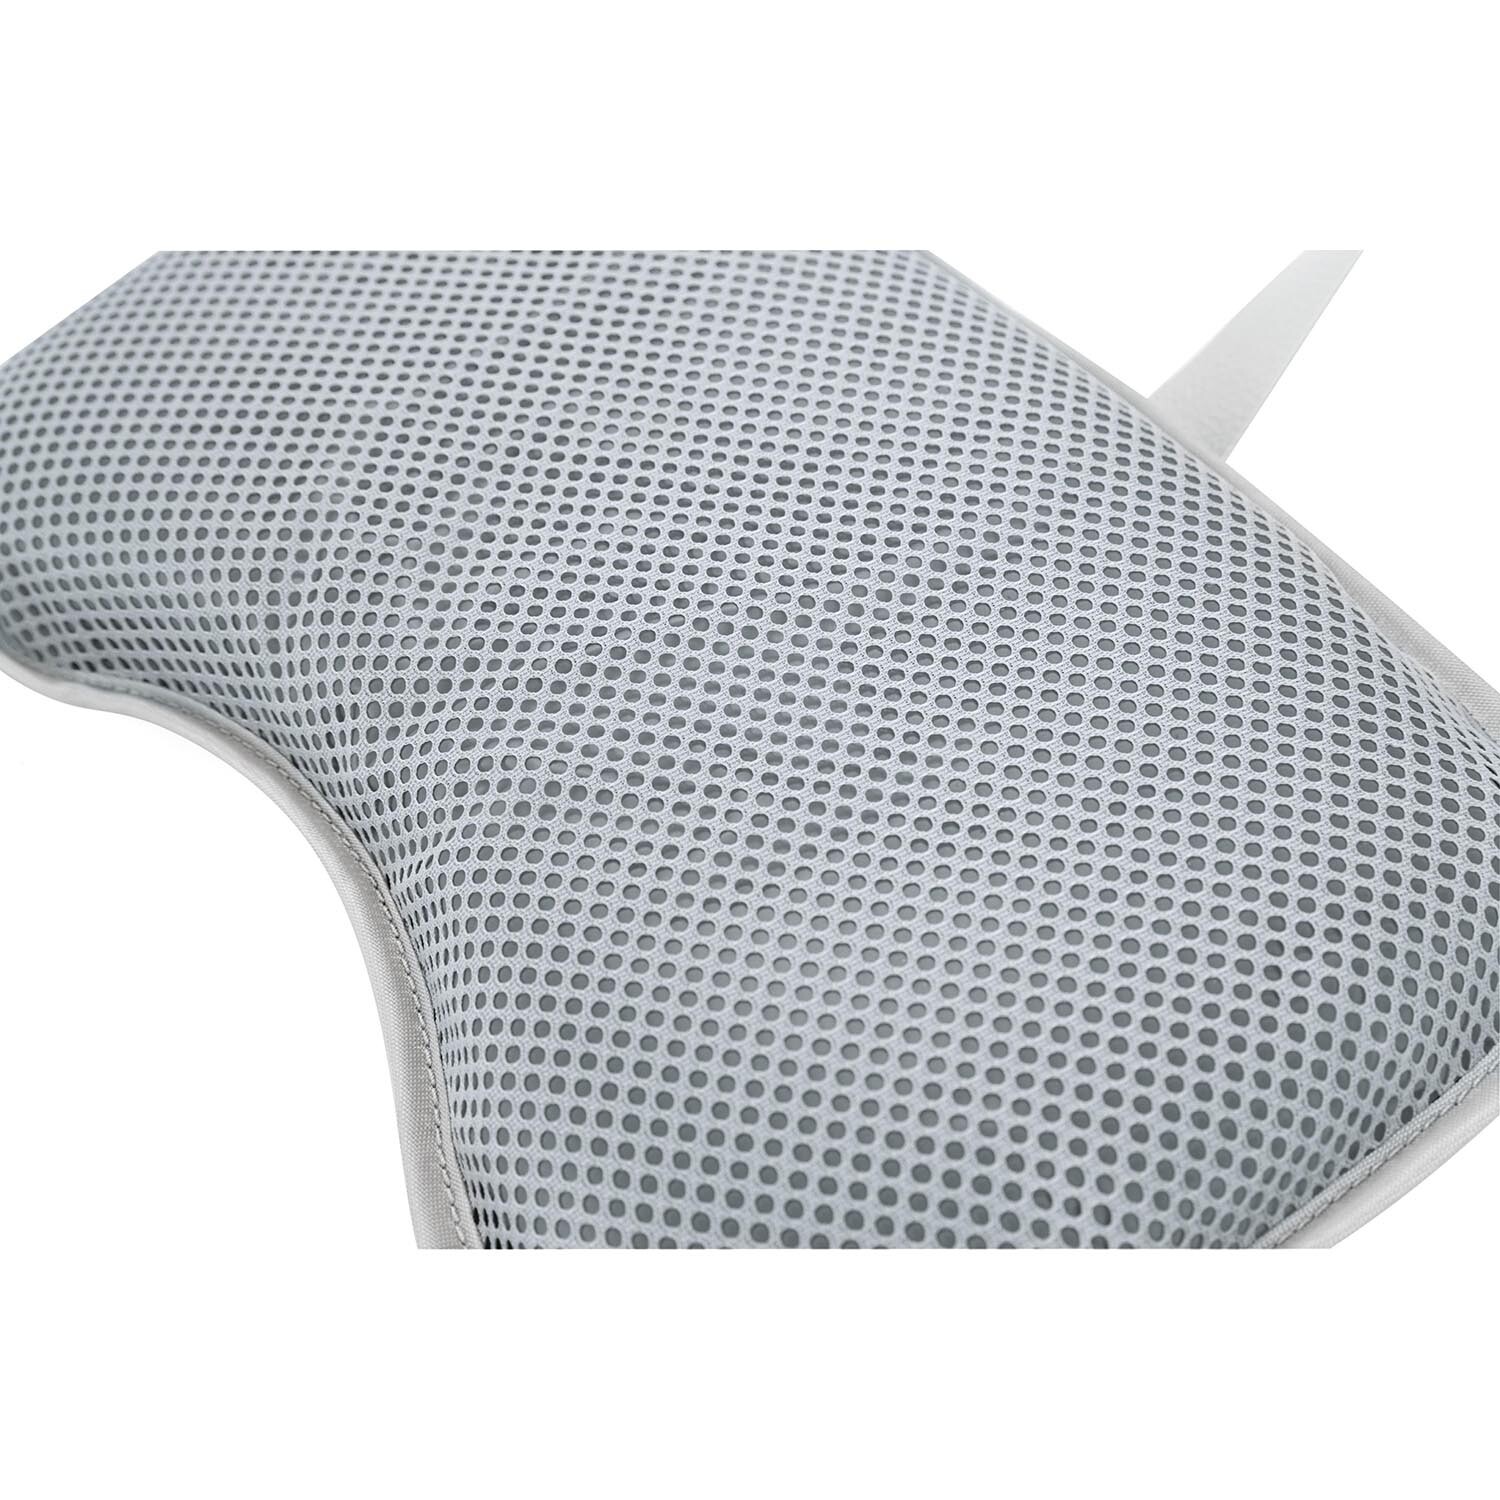 Lay-Z-Spa Mesh Padded Head and Neck Pillow 2 Pack Image 6